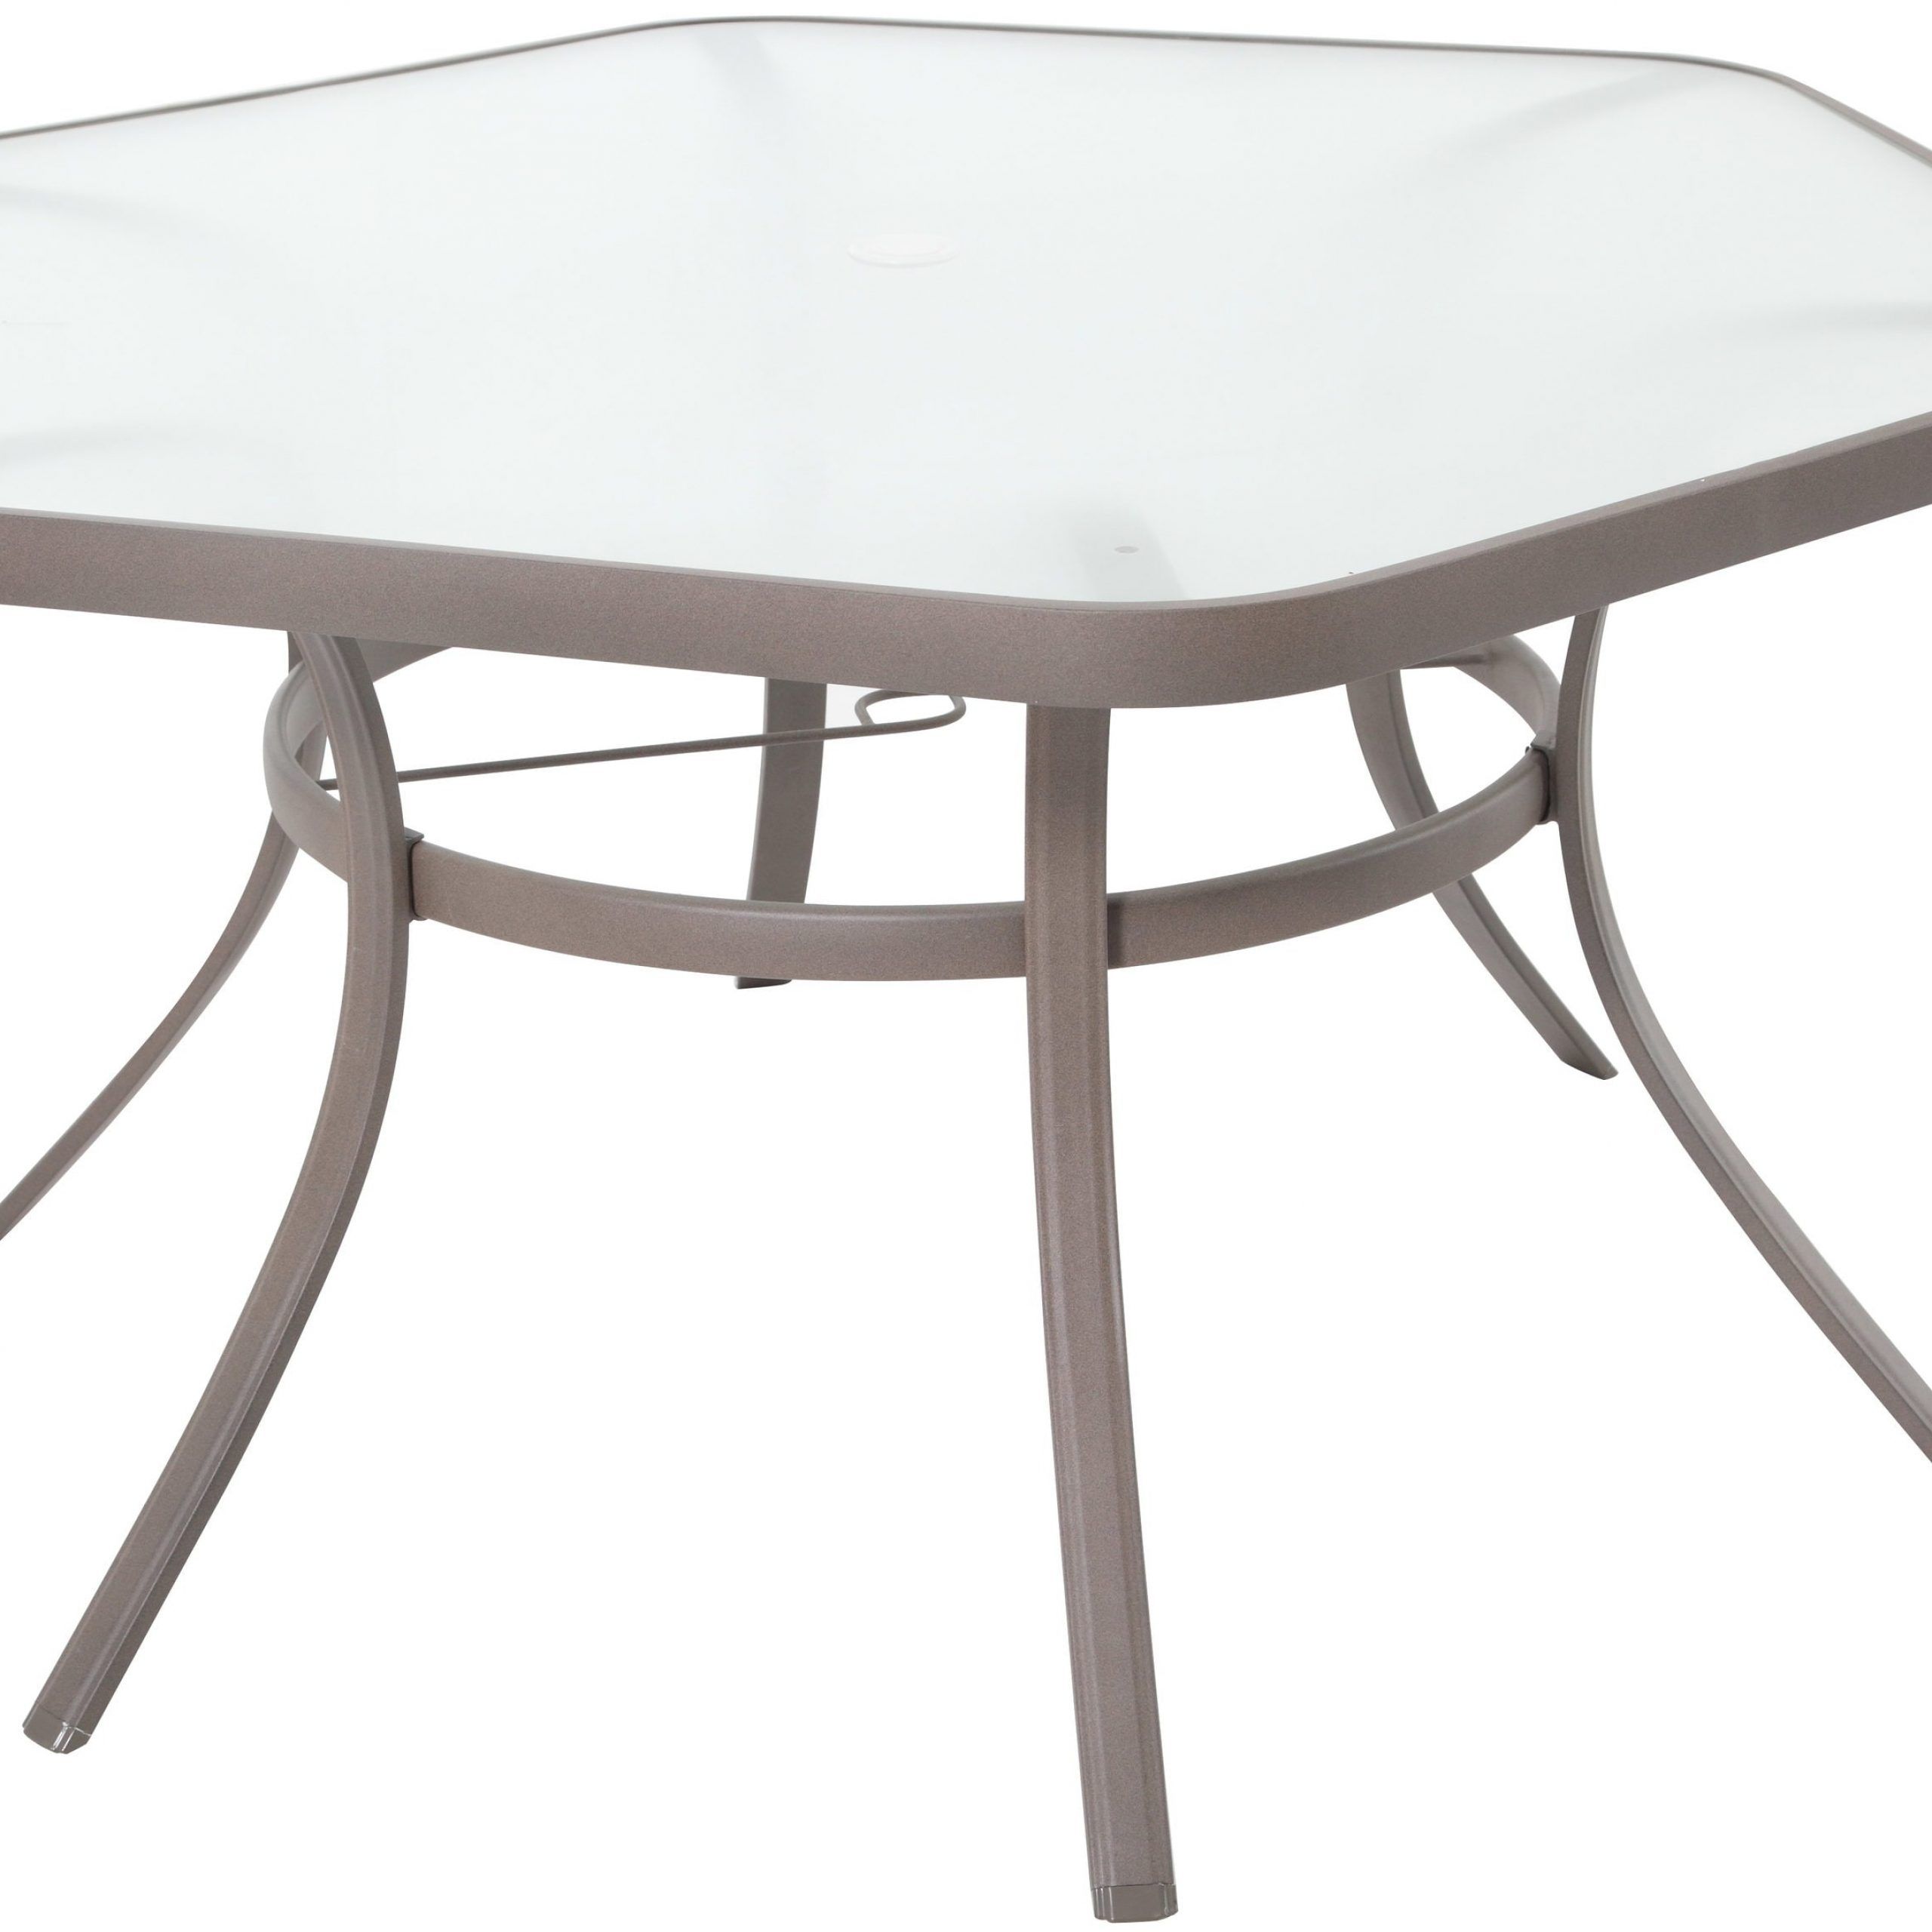 Favorite Garden Treasures Hayden Island Hexagon Outdoor Dining Table W X L Umbrella  Hole At Lowes Inside Octagon Glass Top Outdoor Tables (View 3 of 15)